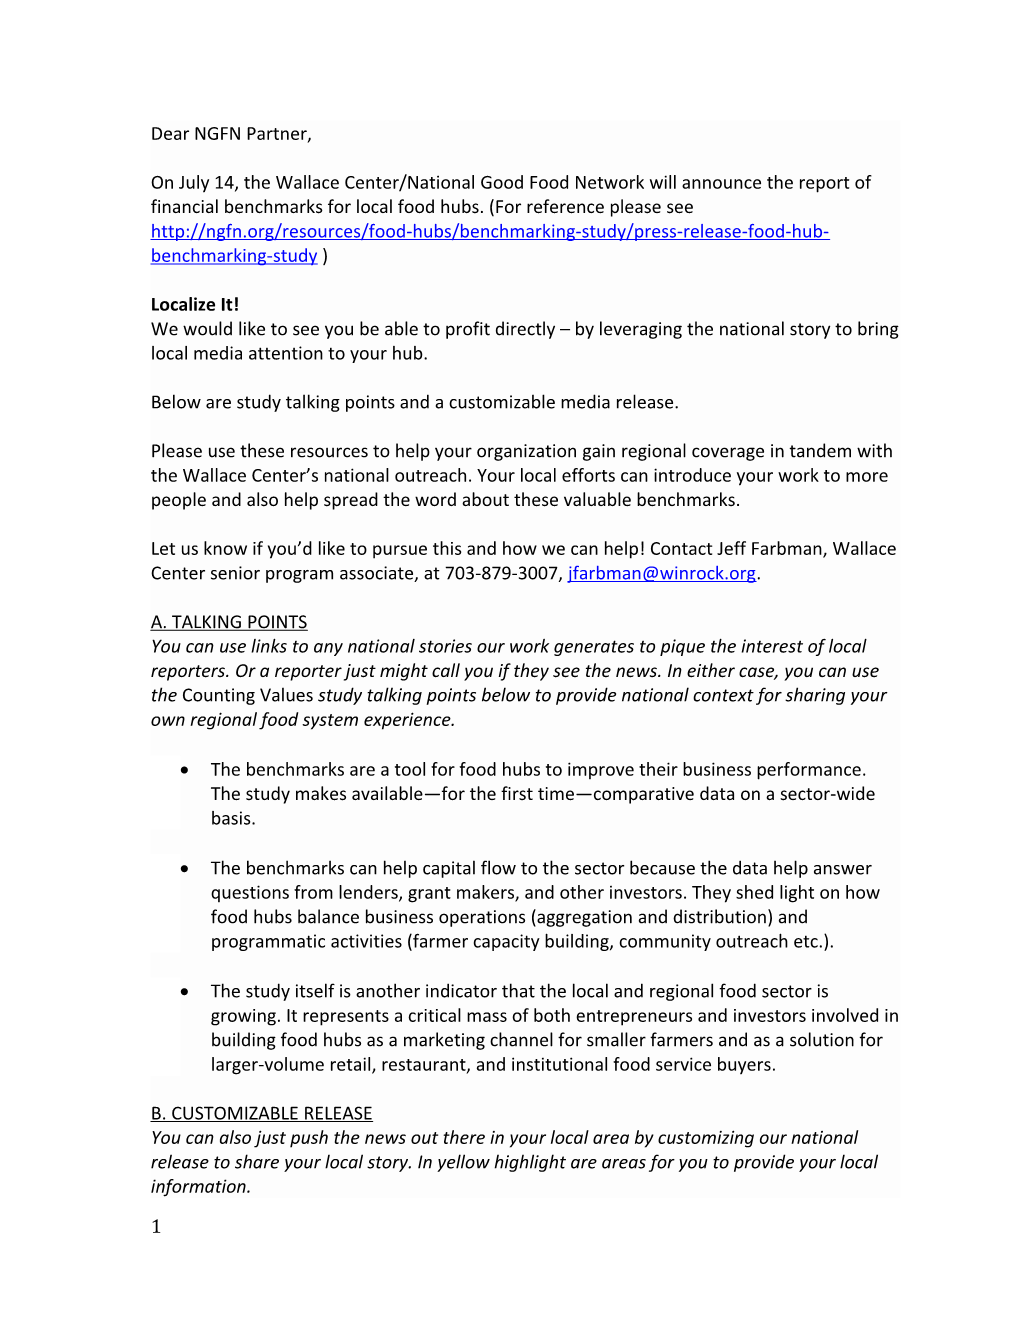 Below Are Study Talking Points and a Customizable Media Release